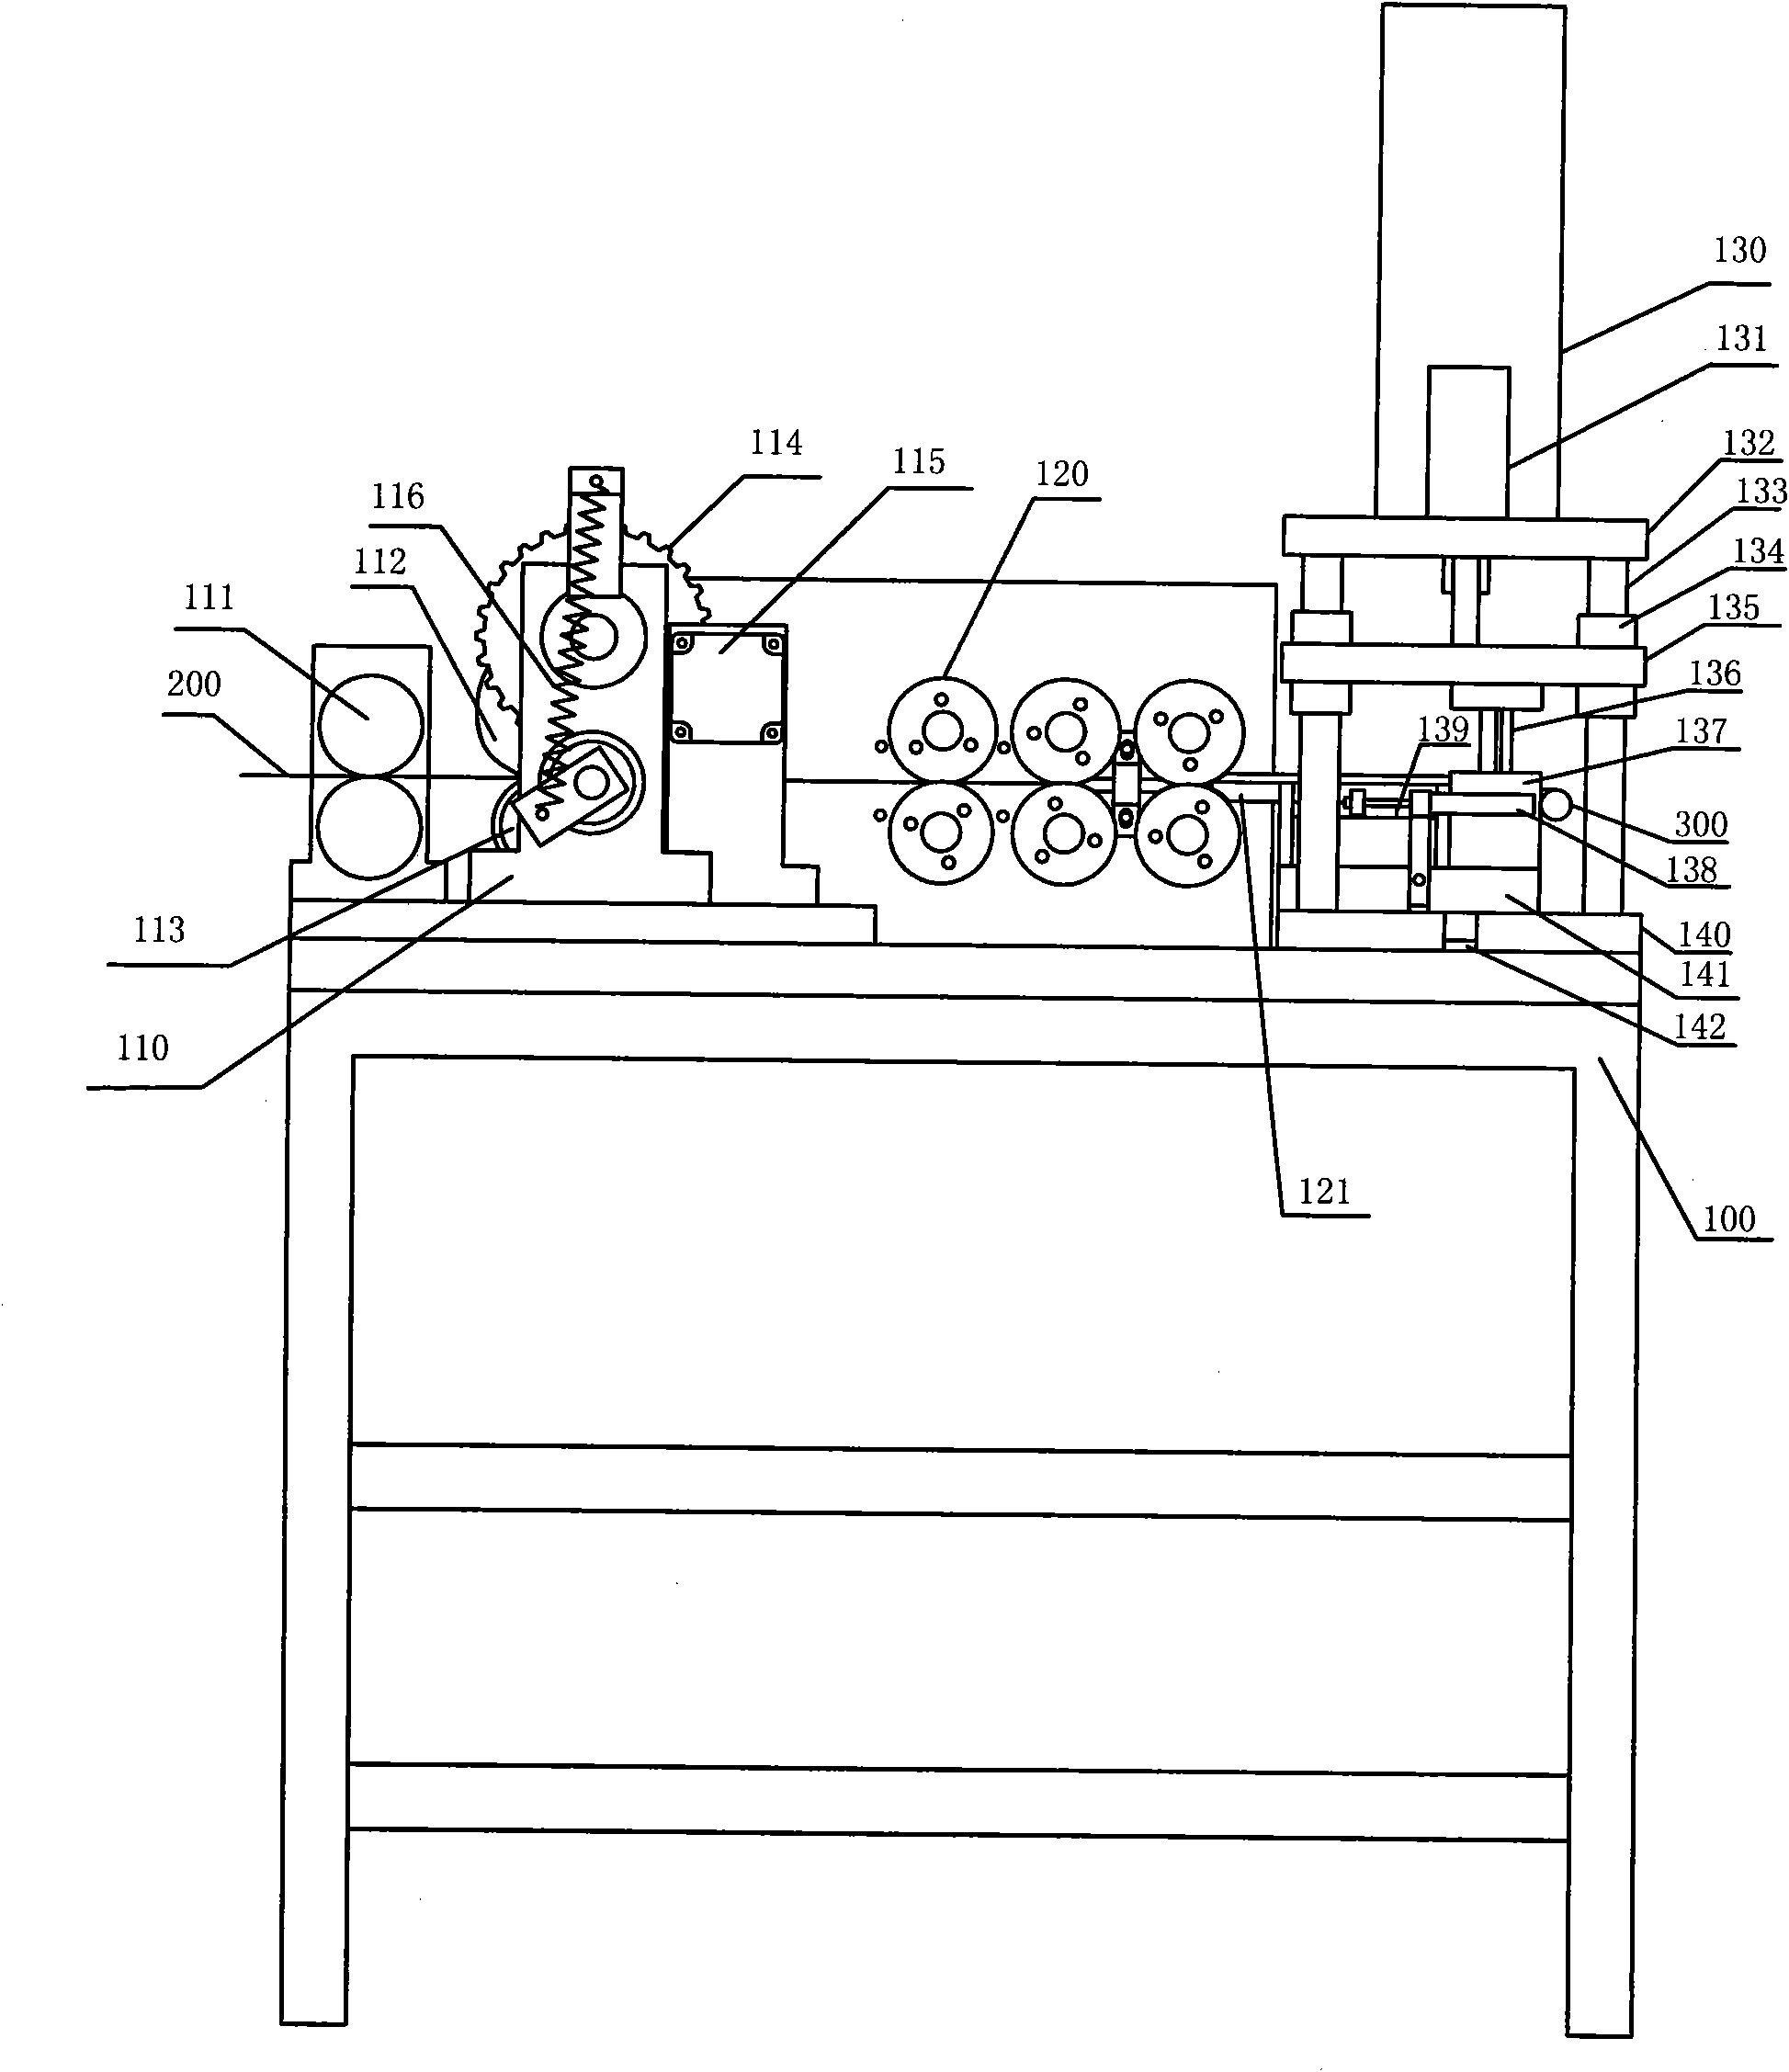 Computer numerical control constant force spring machine